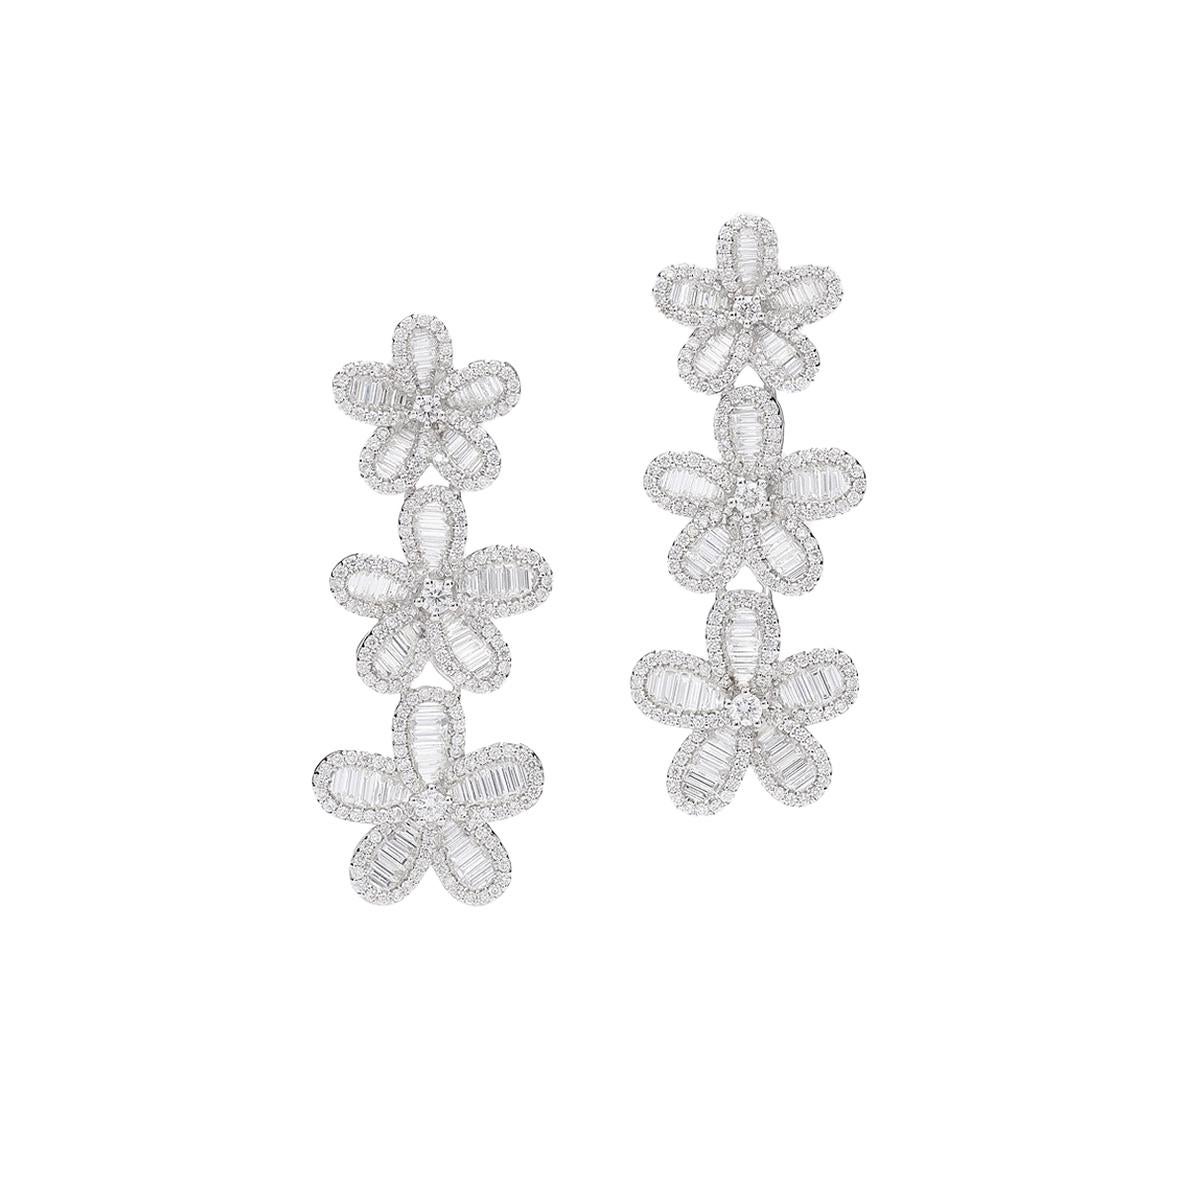 Earrings in 18kt white gold set with 182 baguette cut diamonds 2.33 cts and 406 diamonds 1.84 cts